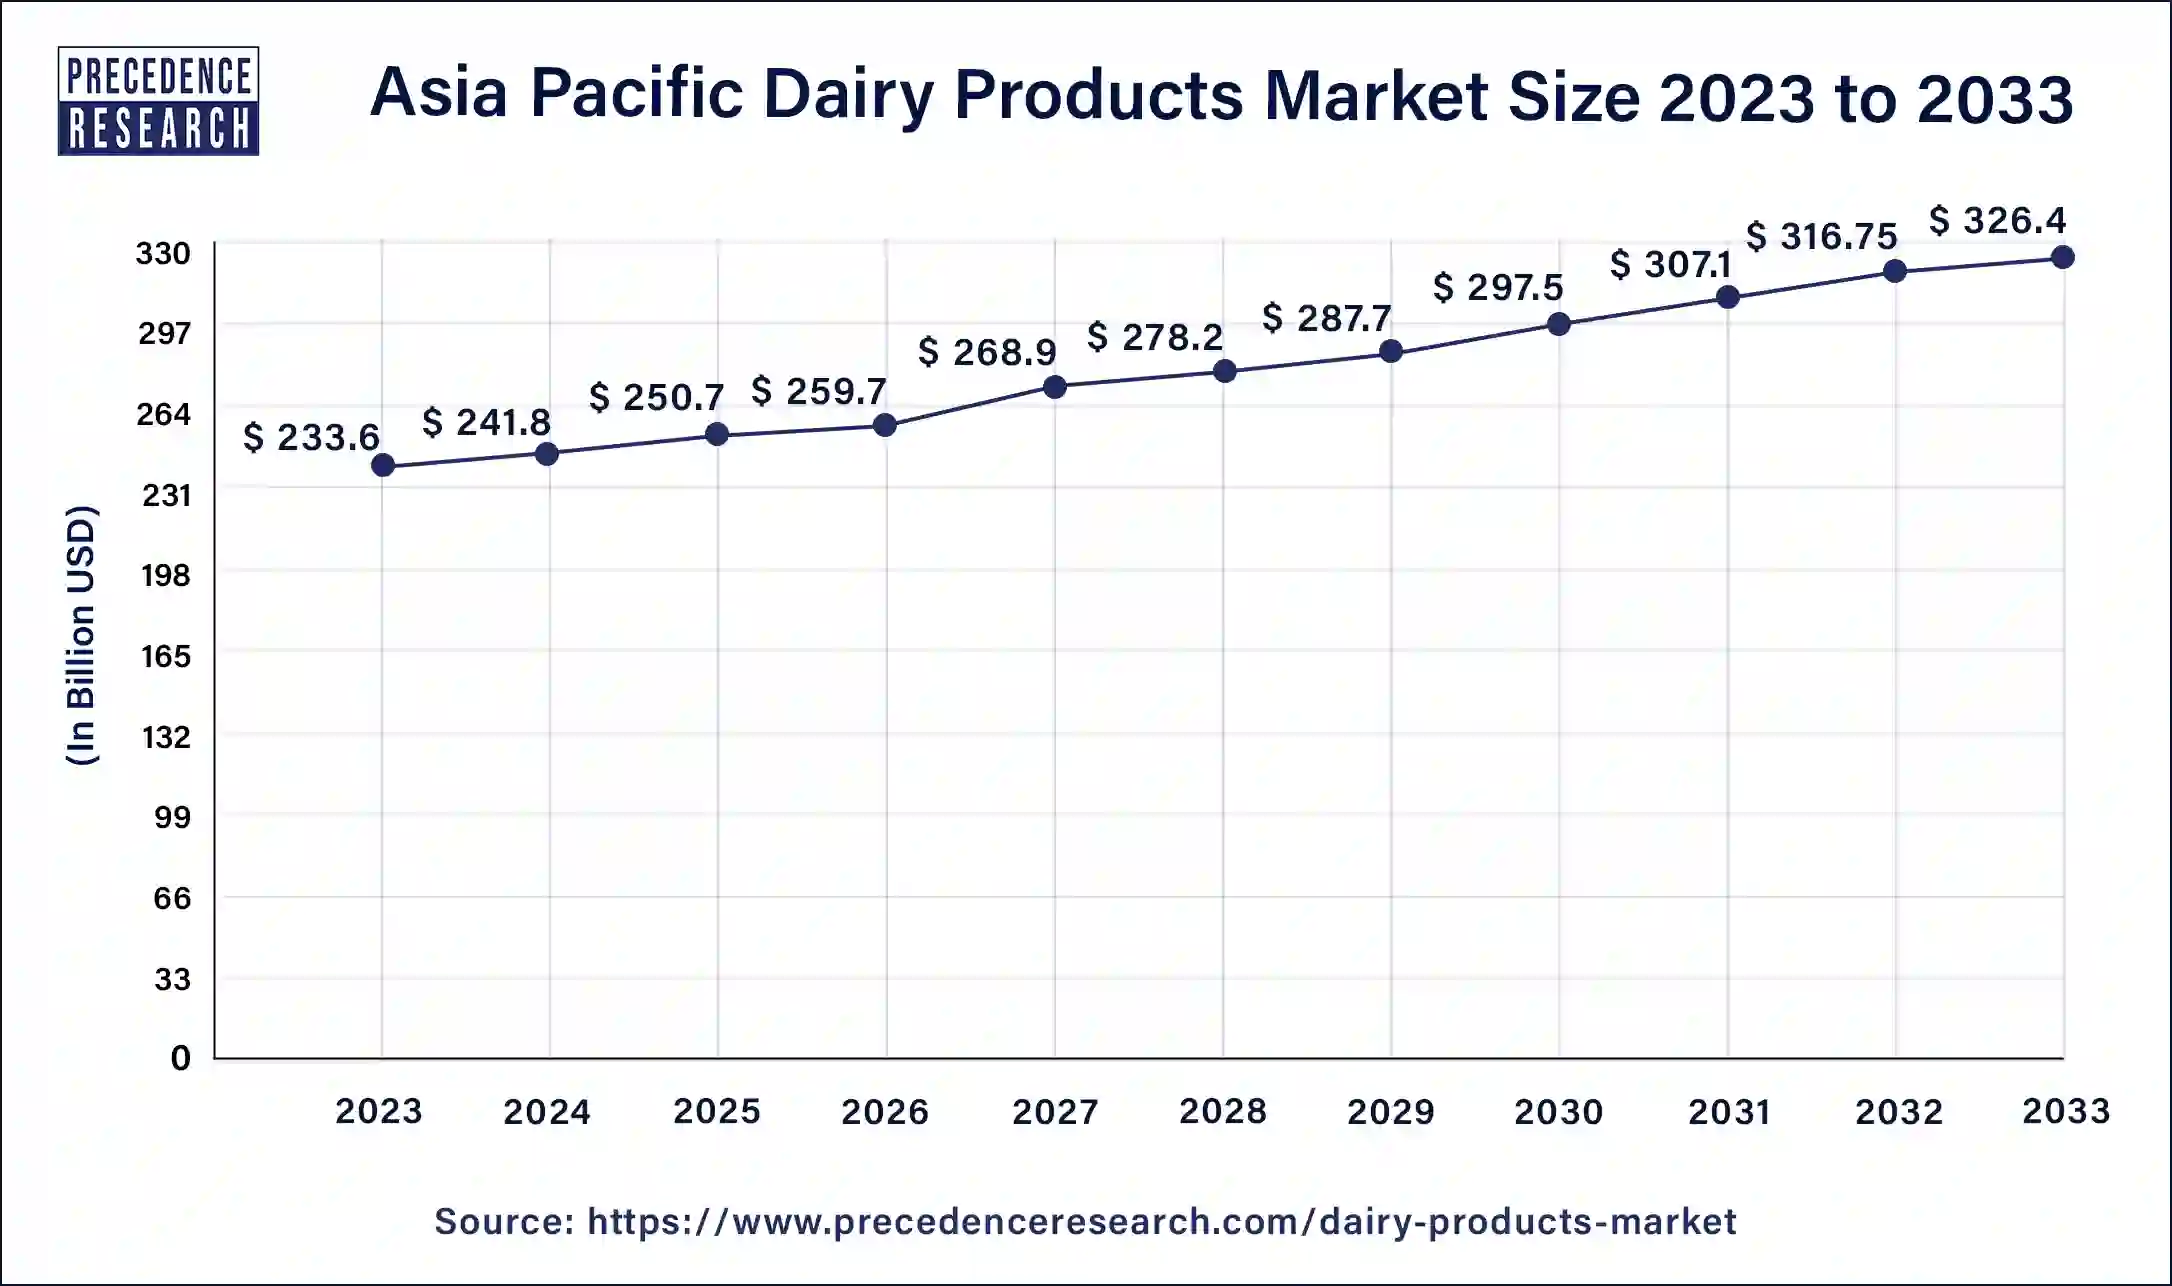 Asia Pacific Dairy Products Market Size 2024 to 2033